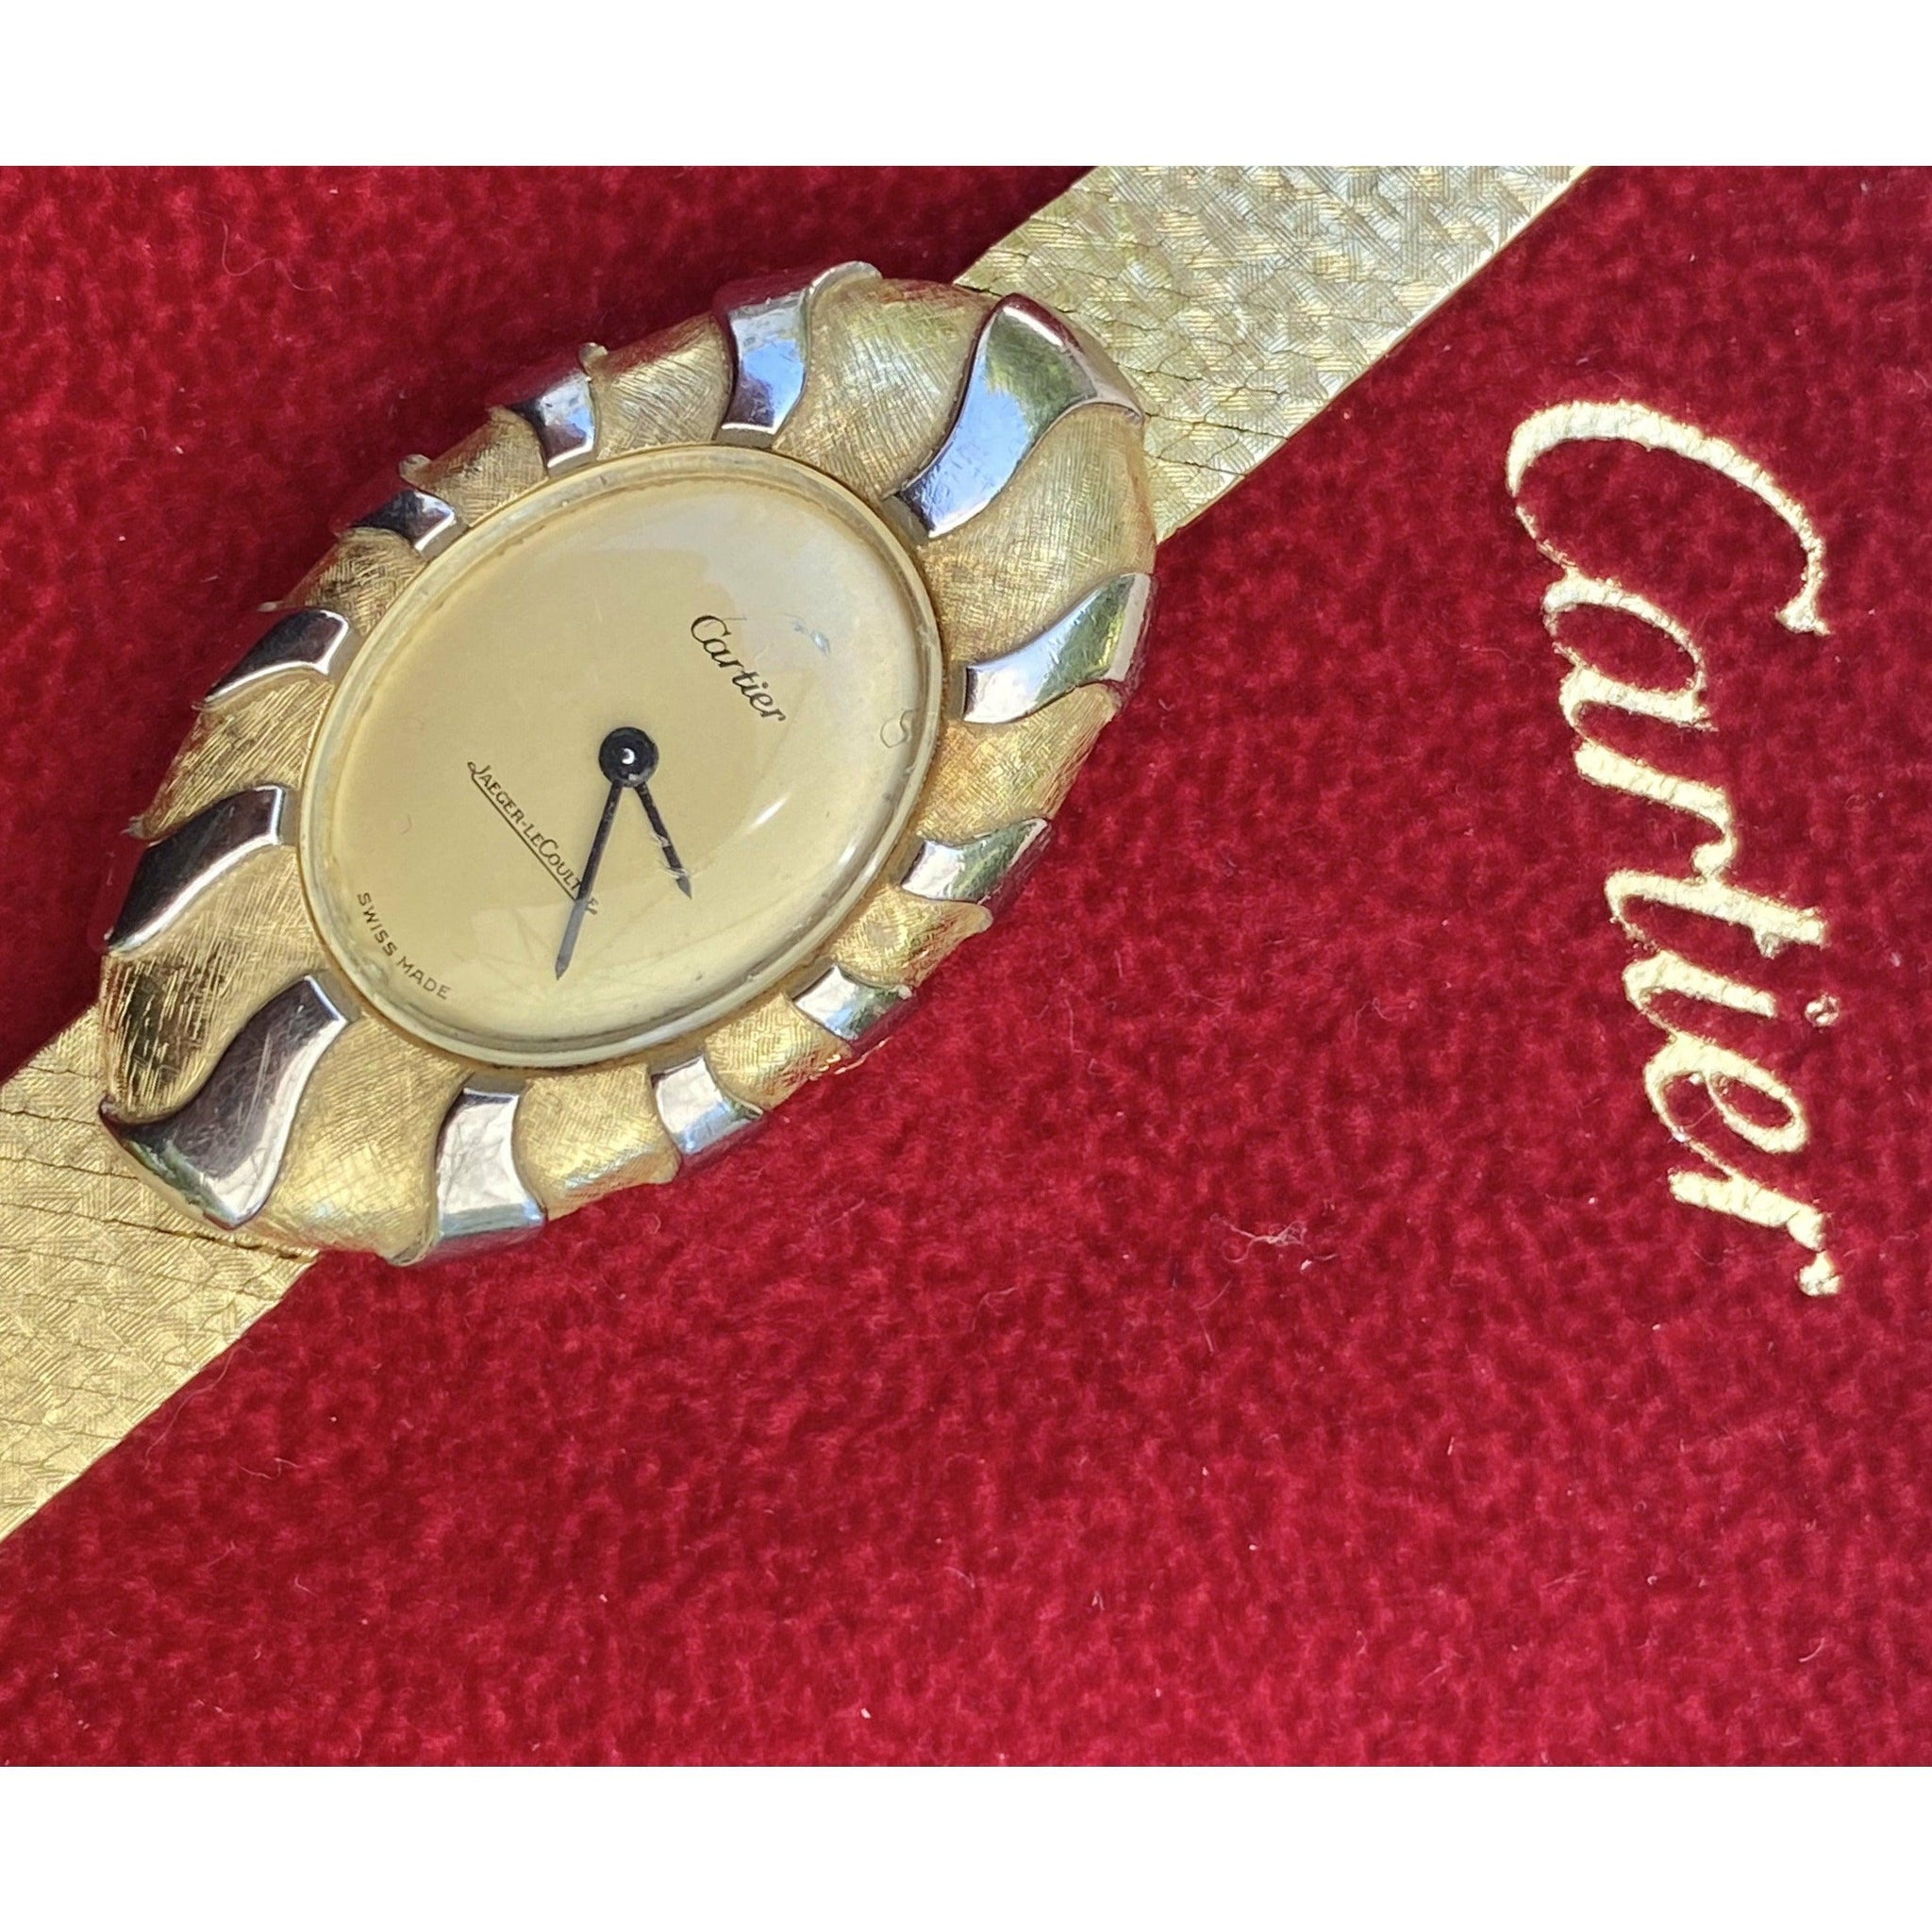 Vintage Two-Tone Cartier and Jaeger LeCoultre Watch in 18k Solid Yellow Gold-watch-ASSAY